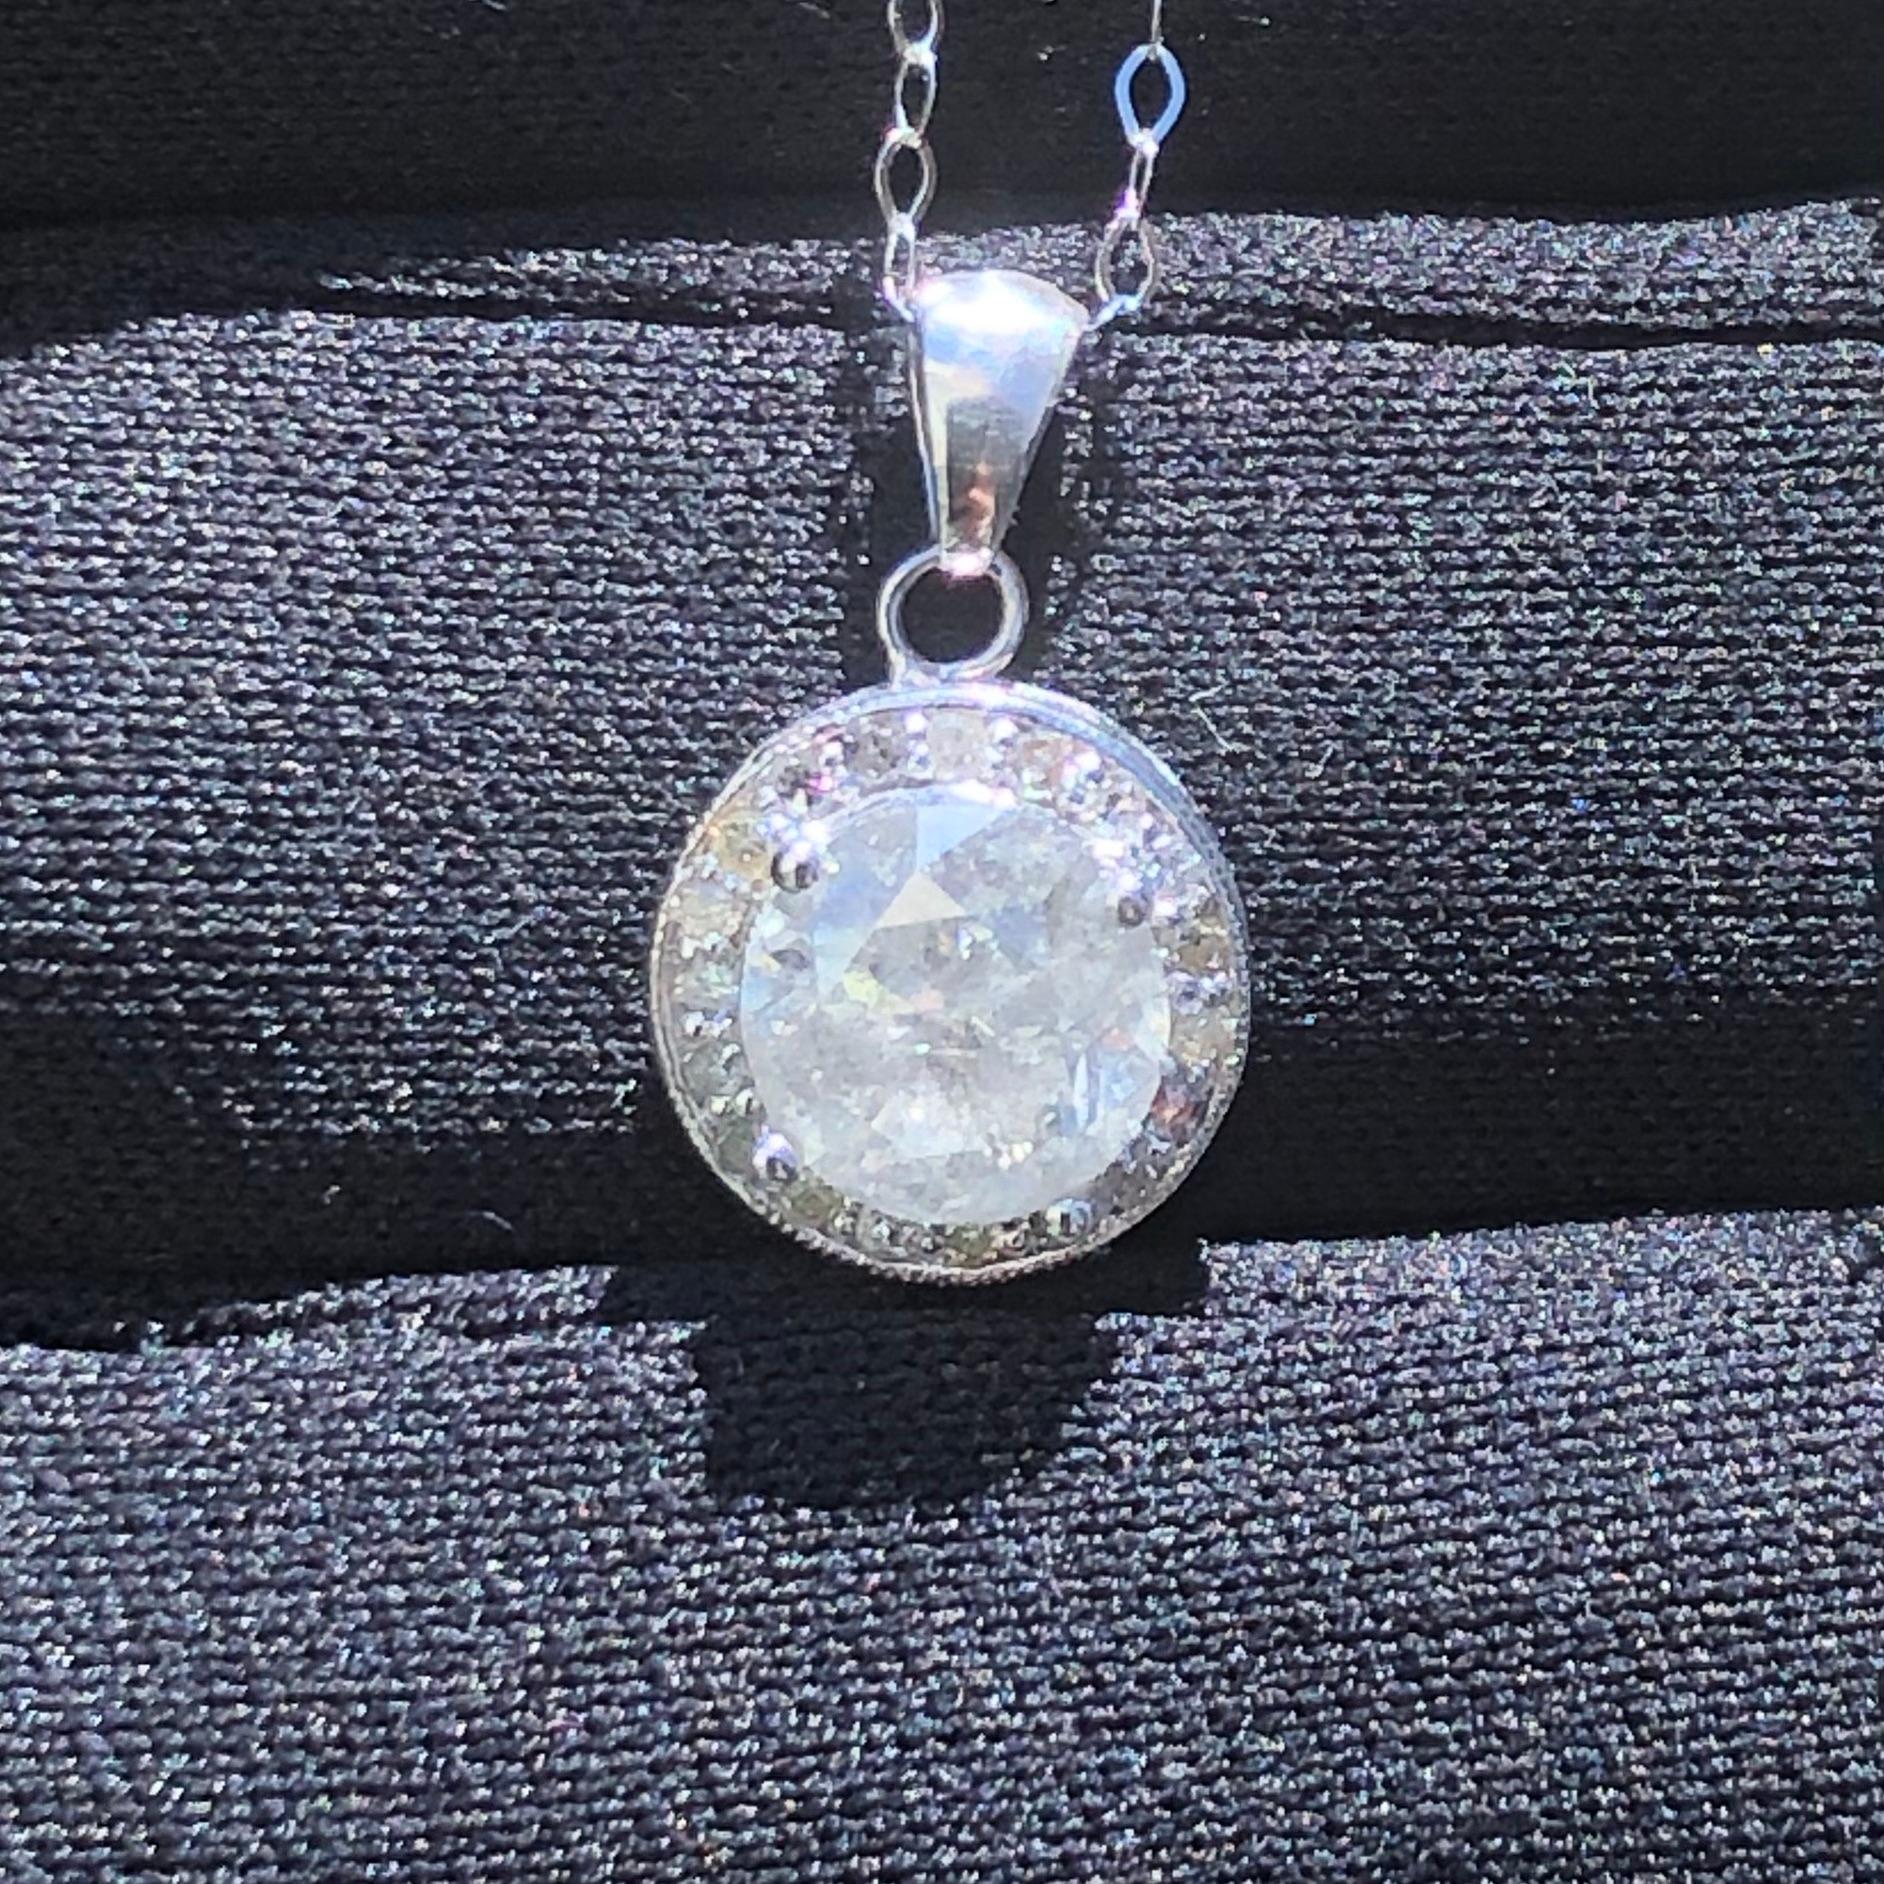 Opulent approx. 1.76 carat solitaire round diamond pendant in 14k white gold with necklace chain. A center brilliant round diamond weighing approx. 1.76 carats (natural earth-mined diamond enhanced) surrounded by approx. 1/3 carats of halo side